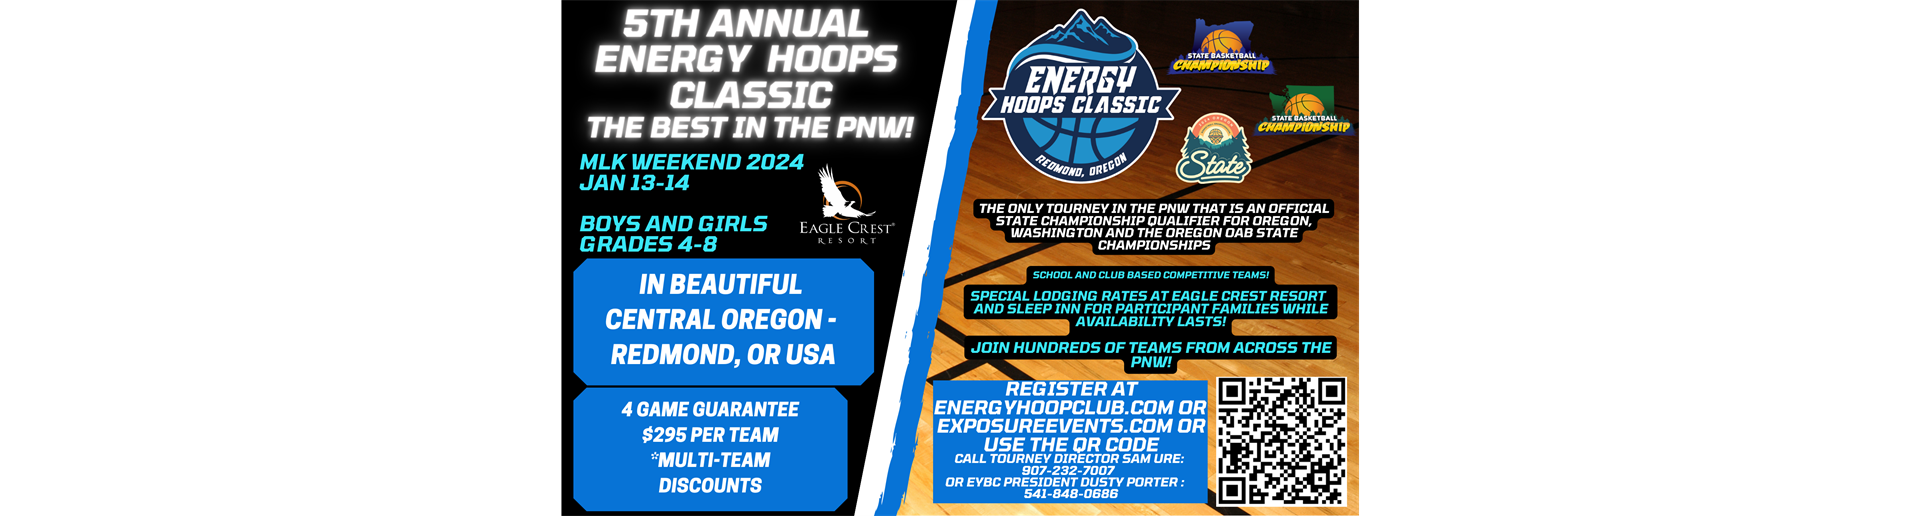 5th Annual Energy Hoops Classic